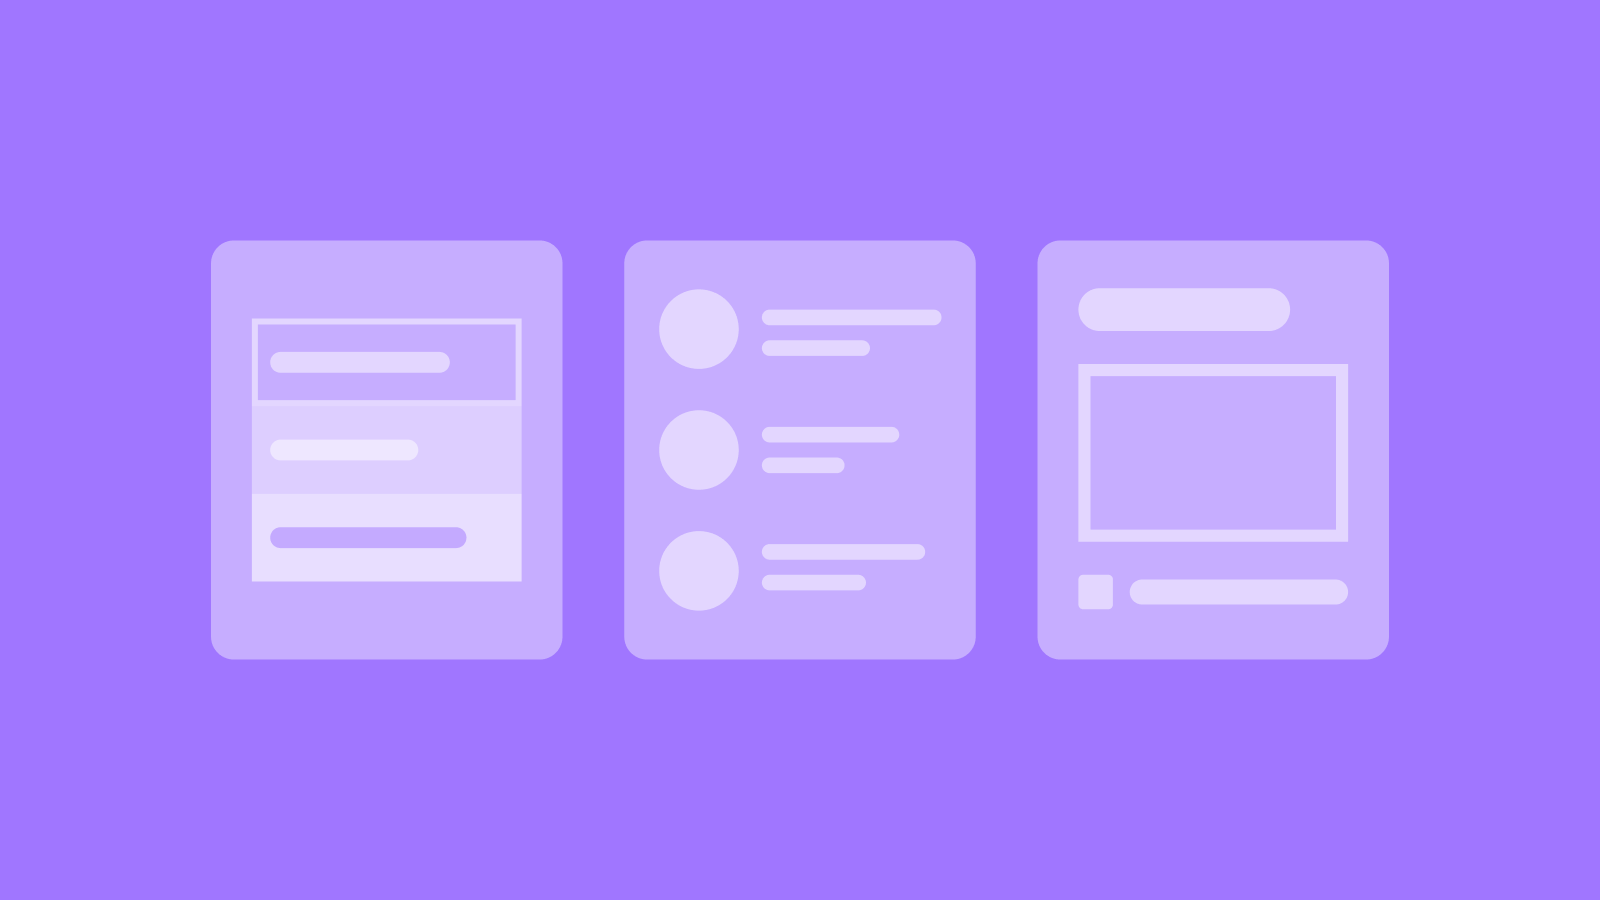 UI components displayed on a purple background